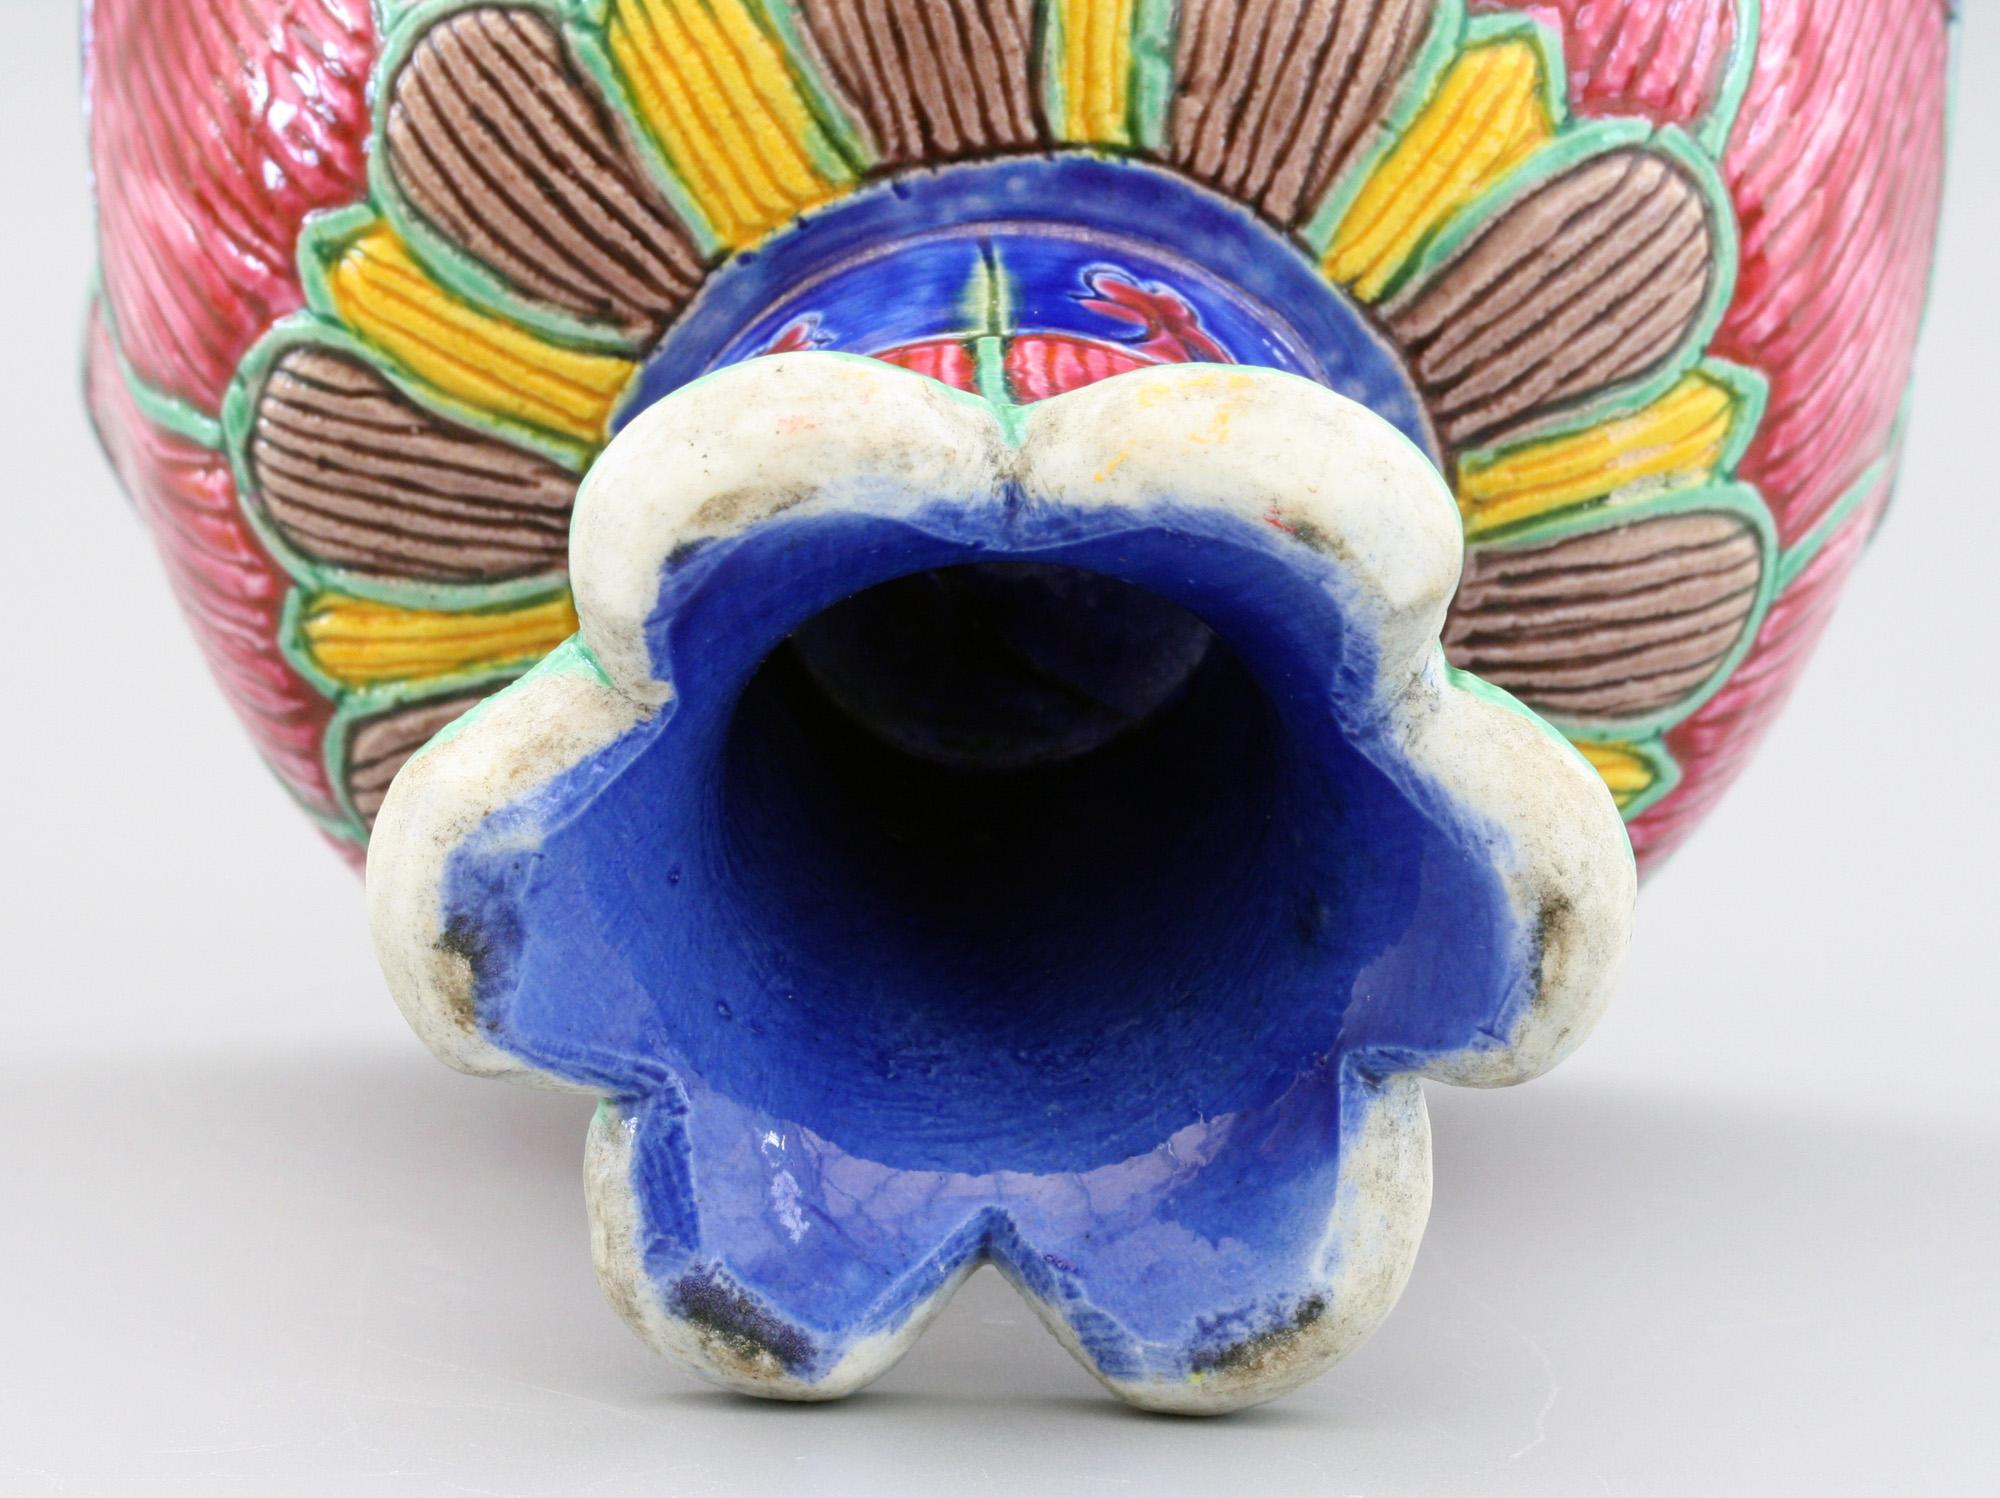 Hand-Crafted Chinese Unusual Porcelain Pedestal Lotus Flower Bowl For Sale